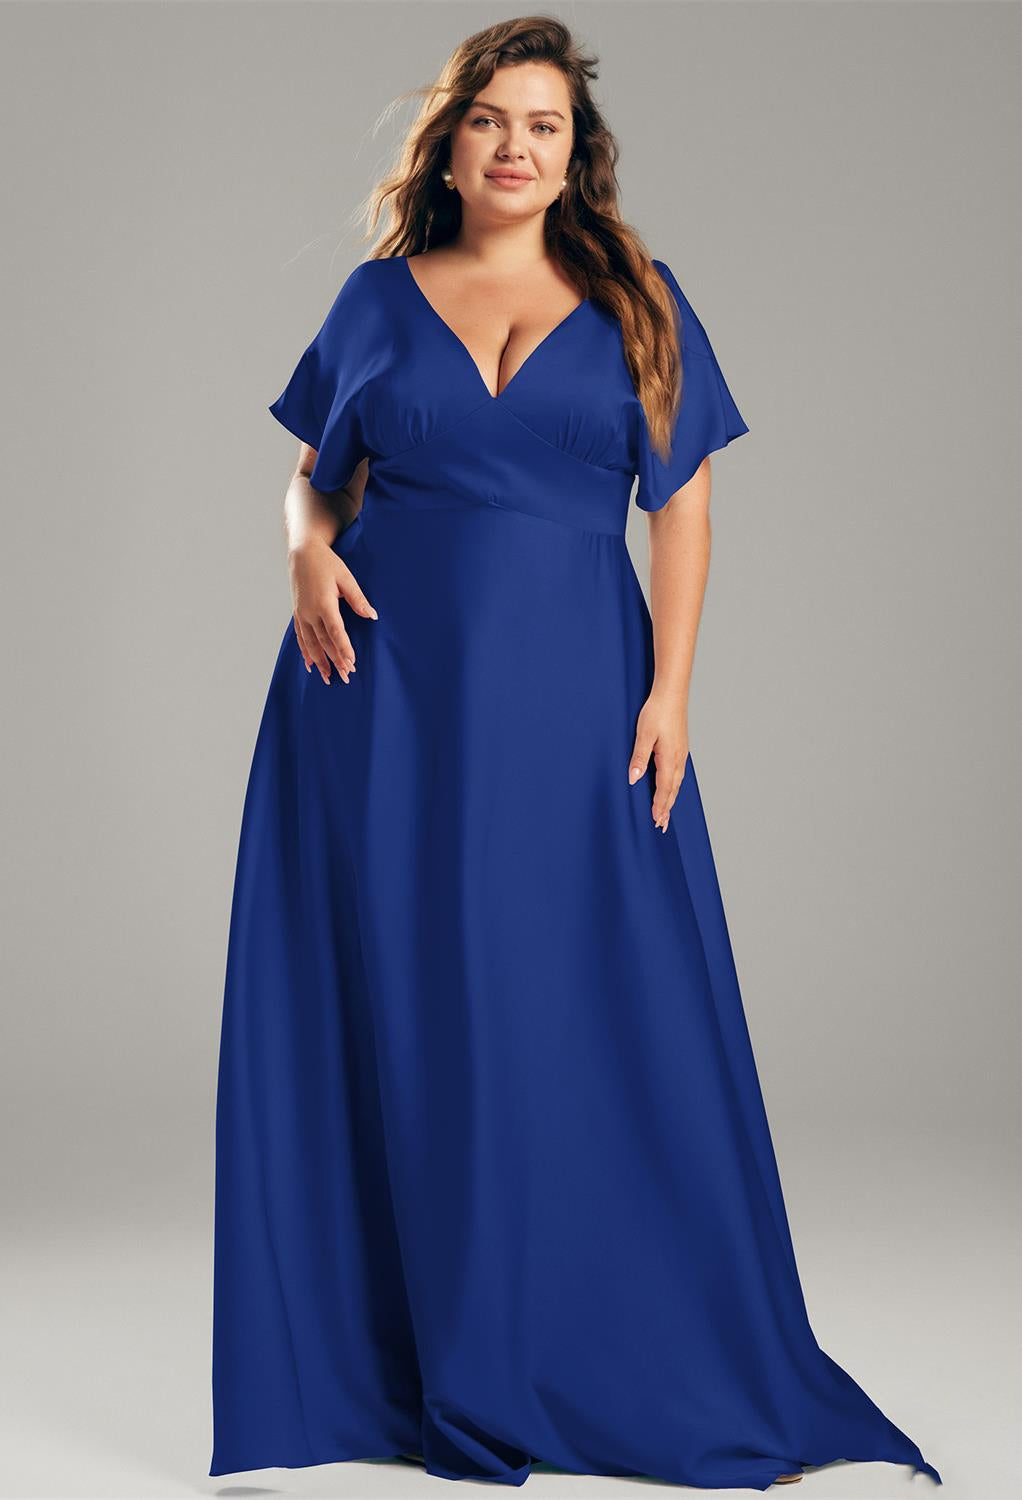 A bridesmaid in a Nora - Satin Charmeuse Bridesmaid Dress - Off The Rack by Bergamot Bridal found at a bridal shop in London.